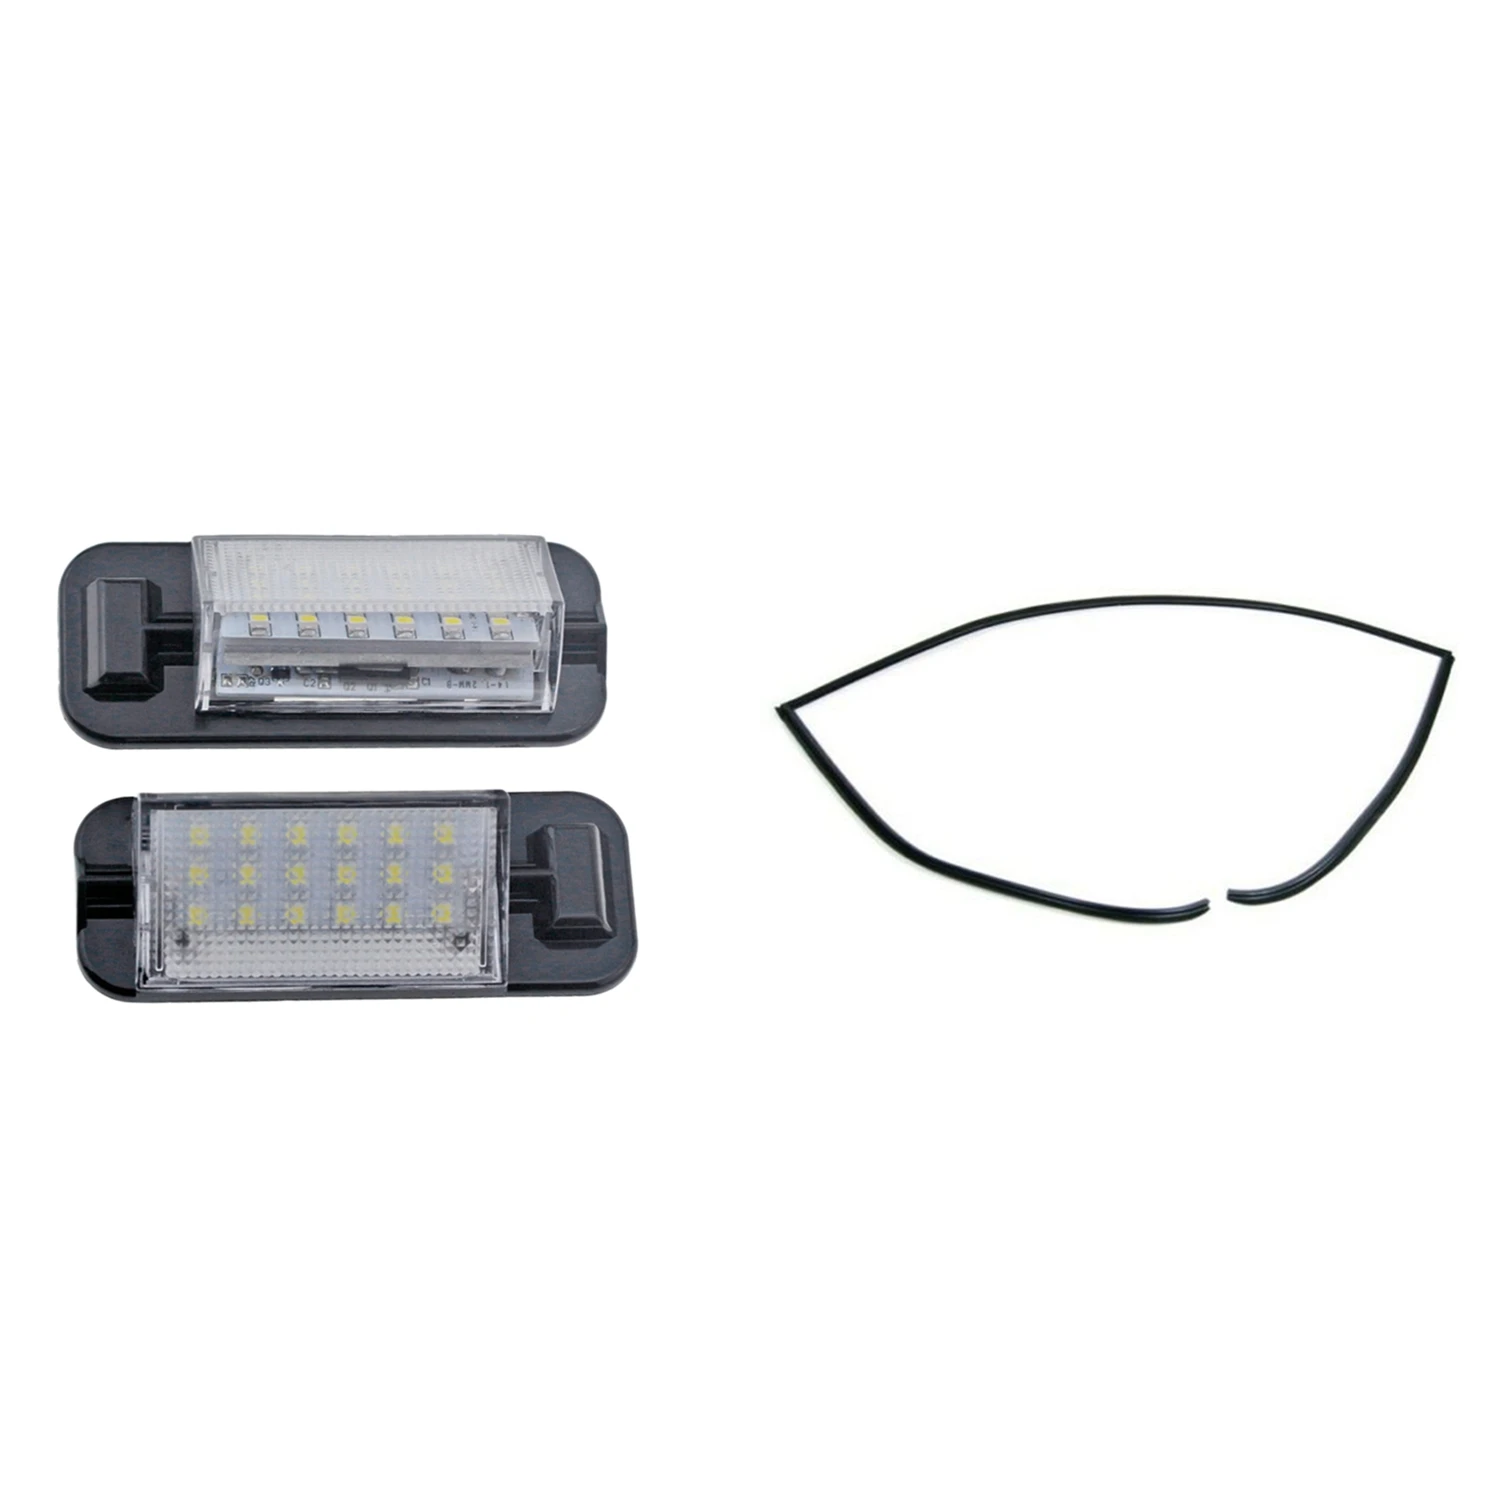 

2Pcs 18Led Car High Power White License Plate Light with Rear Windshield Upper Moulding Seal 51317027916